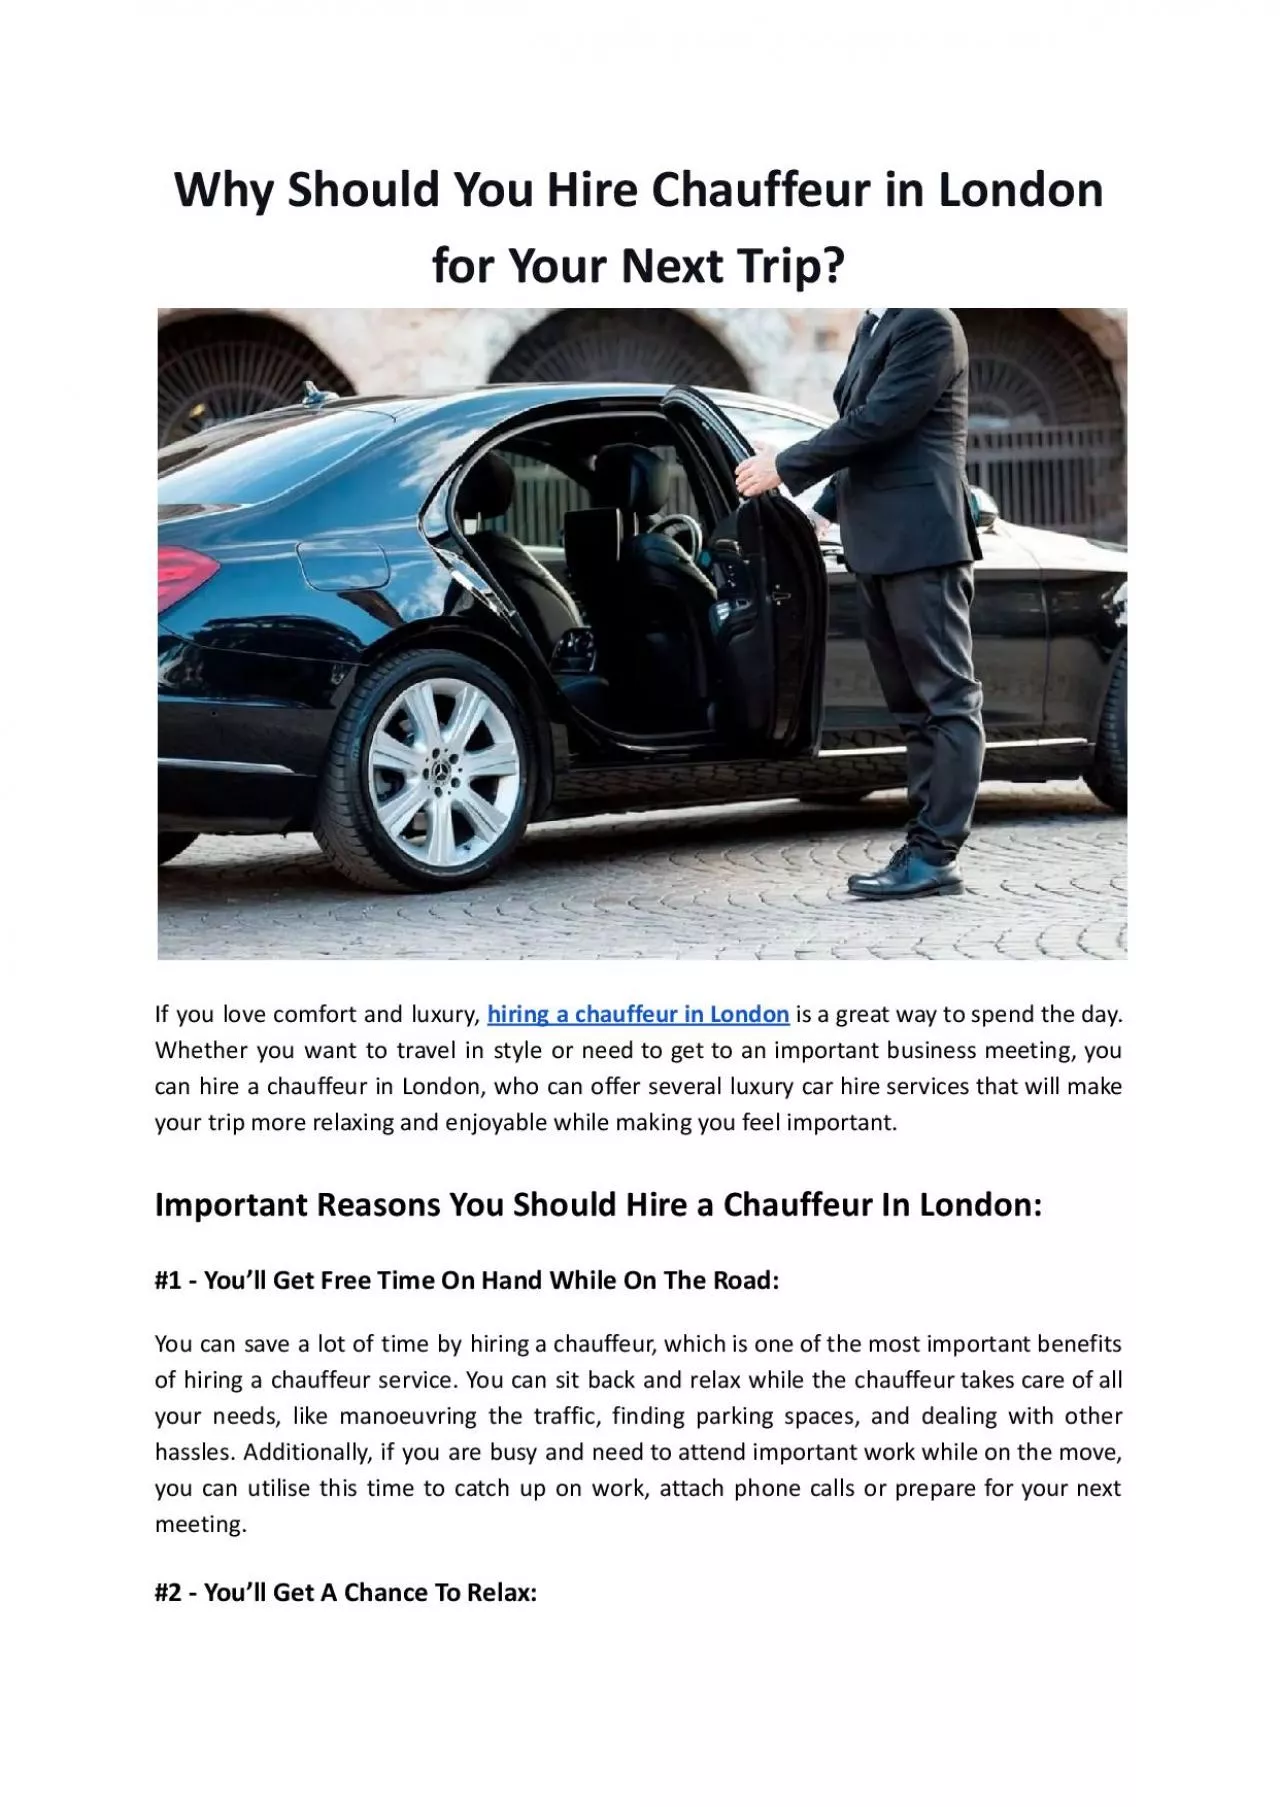 Why Should Hire a chauffeur in London for Your Next Trip - MKL Chauffeurs